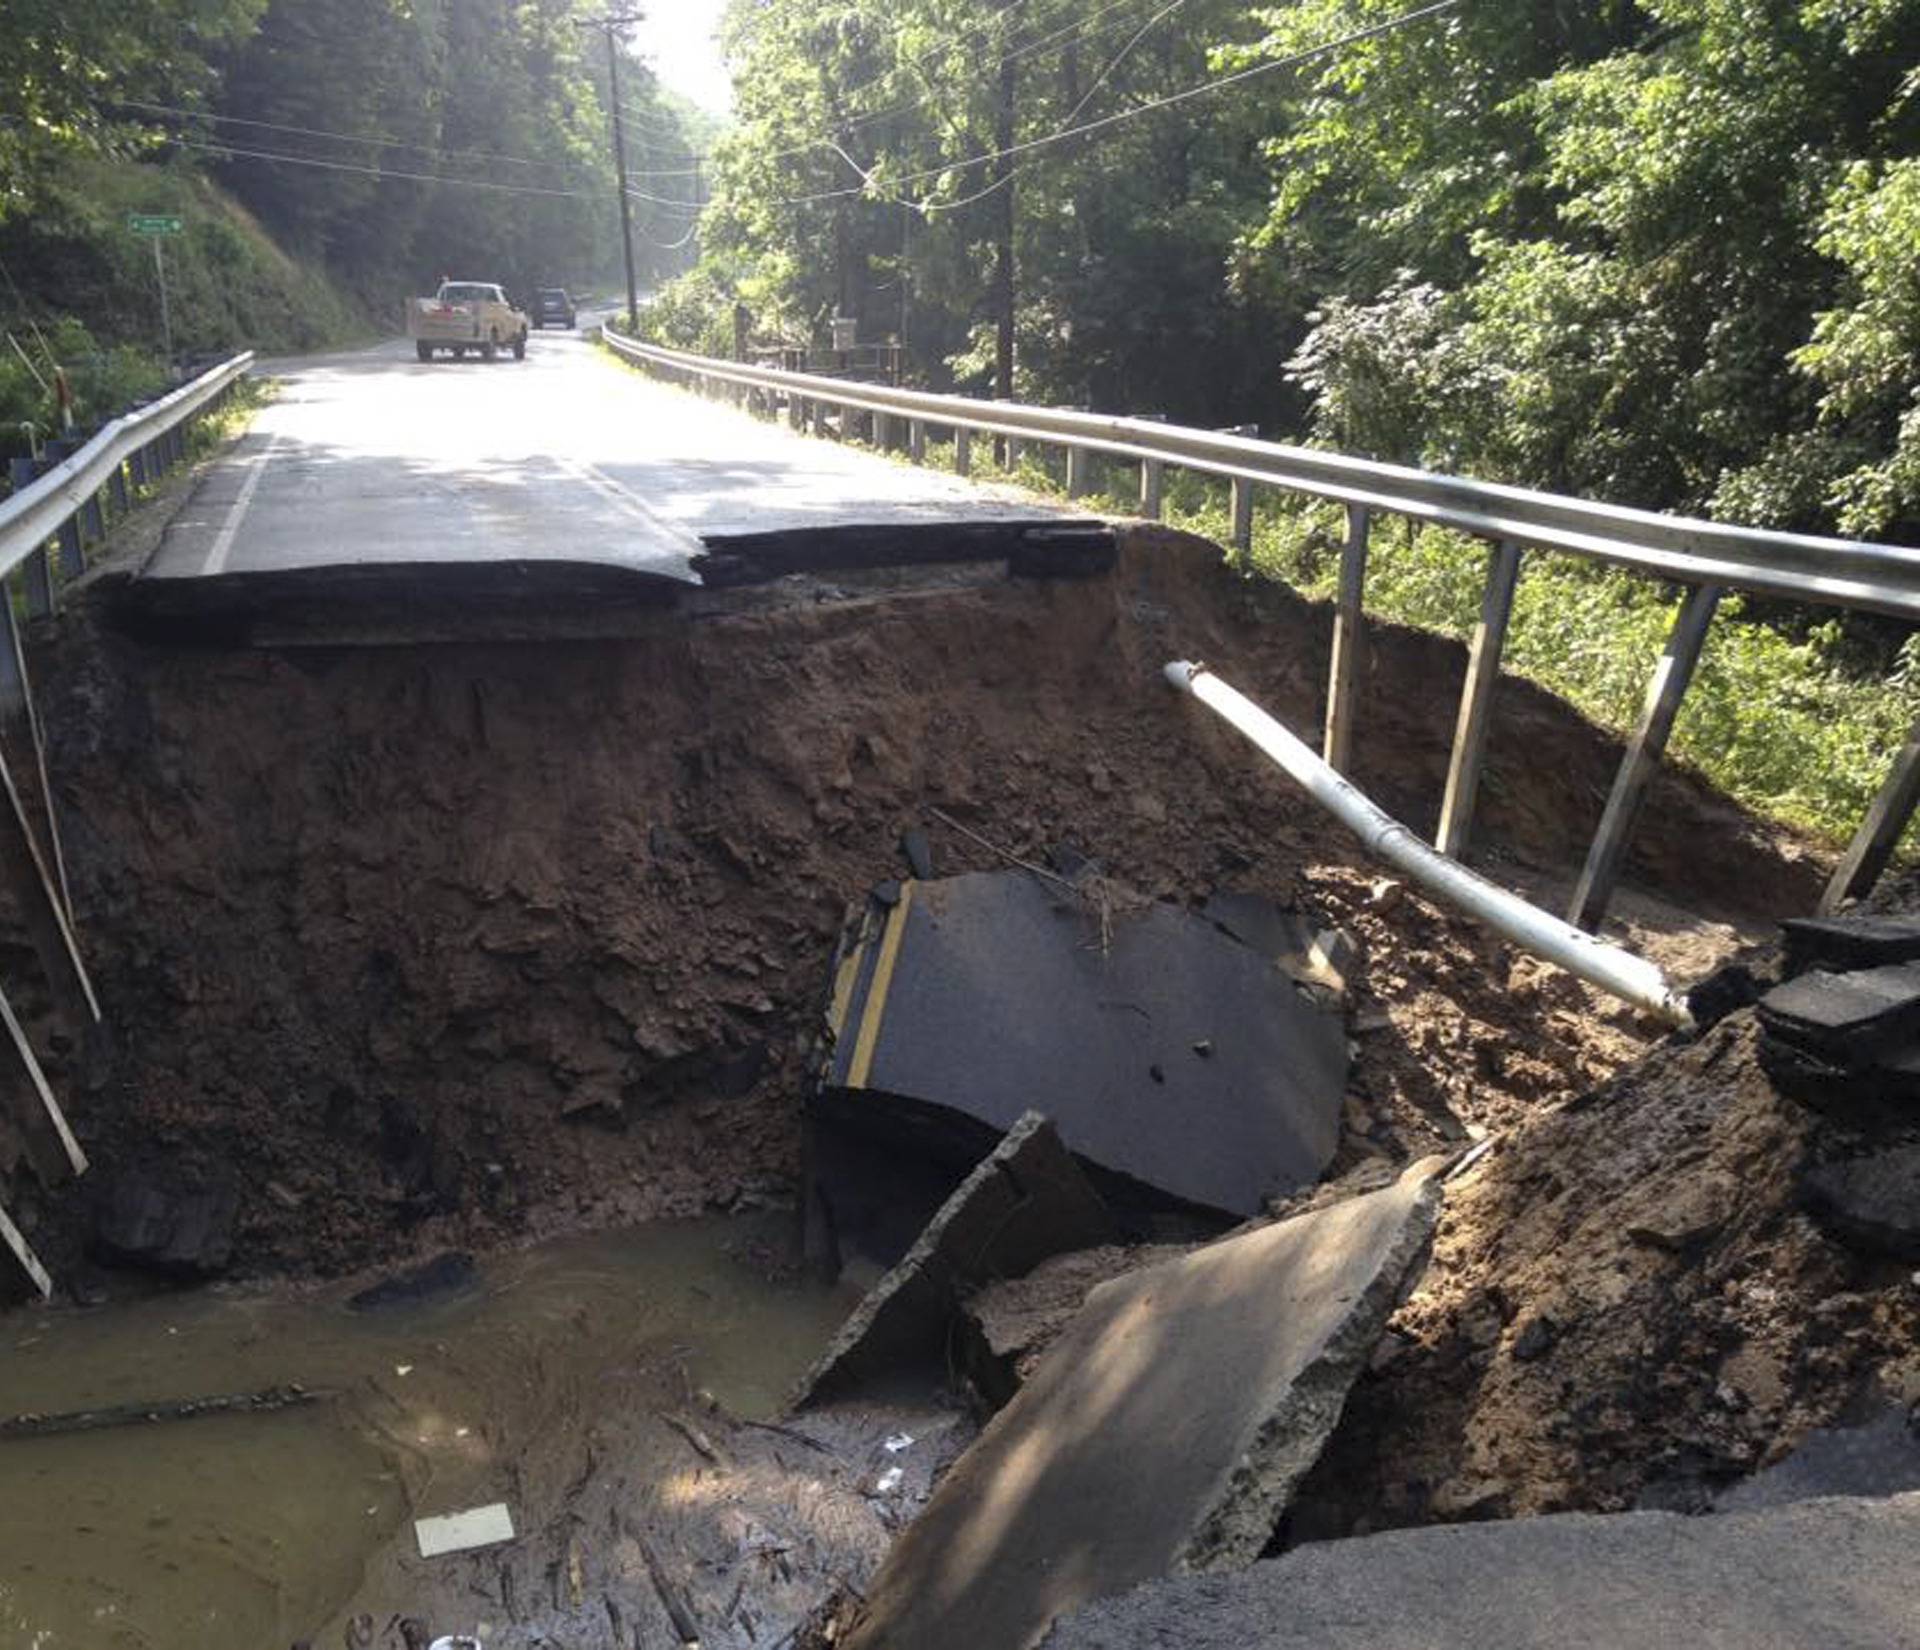 The West Virginia State Highway 4 along the Elk River shows extensive damage after flood water has dropped in the Clendenin